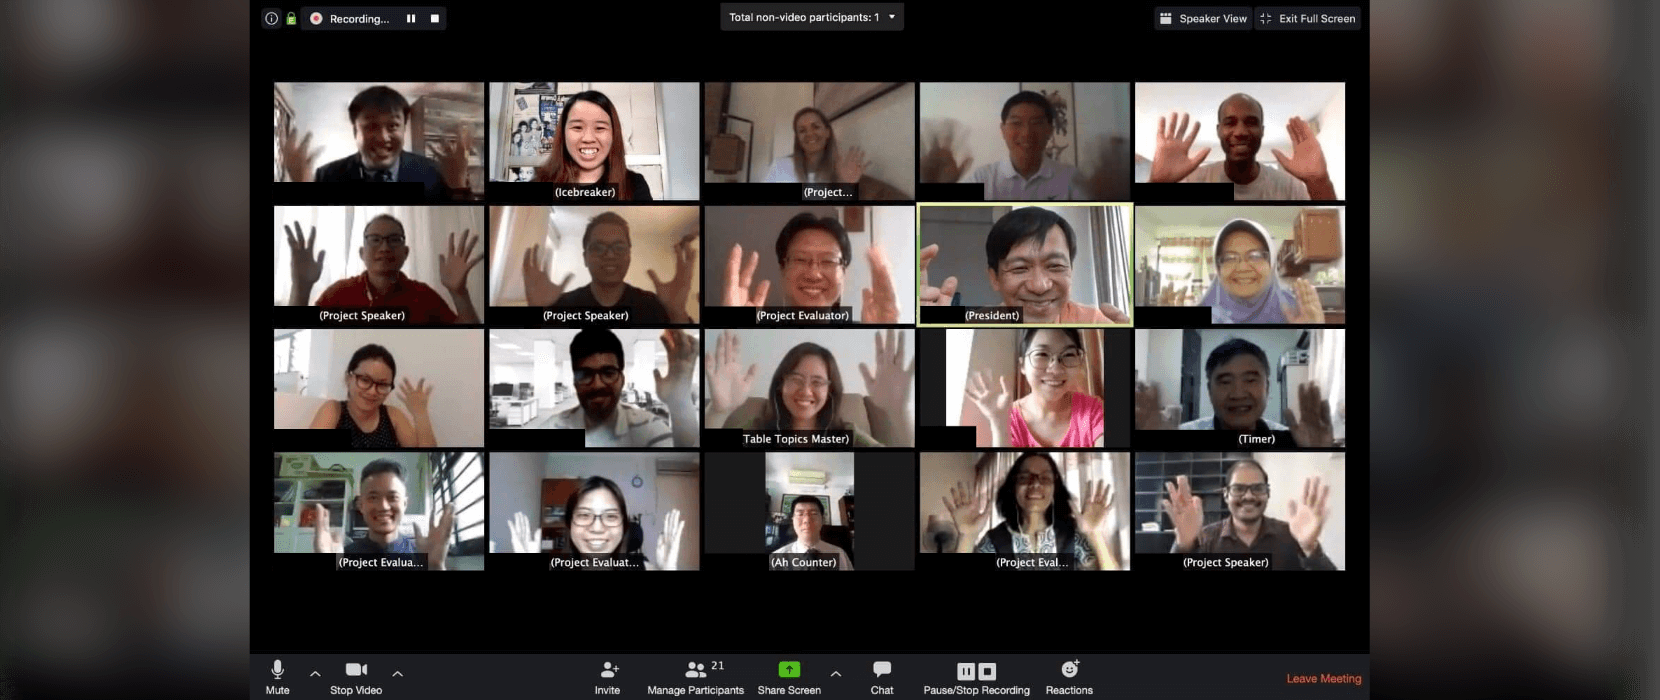 Group of people smiling during a Zoom meeting